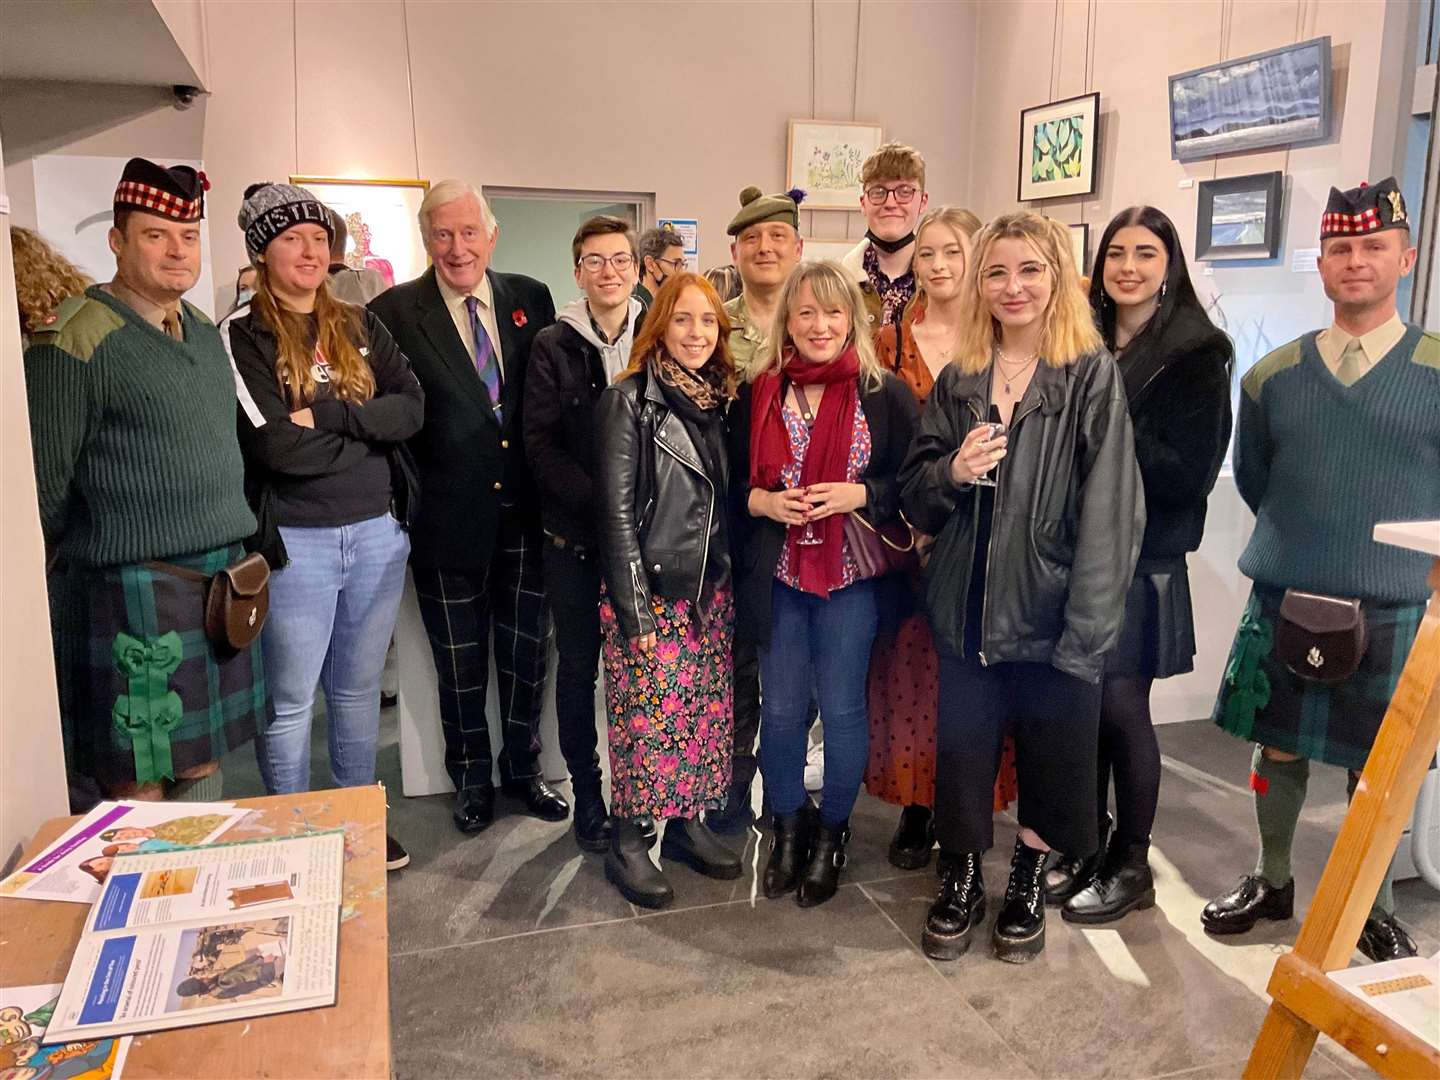 Lord Lieutenant of Moray, Major General Seymour Monro (3rd from left) opening the exhibition with featured artists and soldiers from Fort George who offered their support. Picture by Wendy Faux.